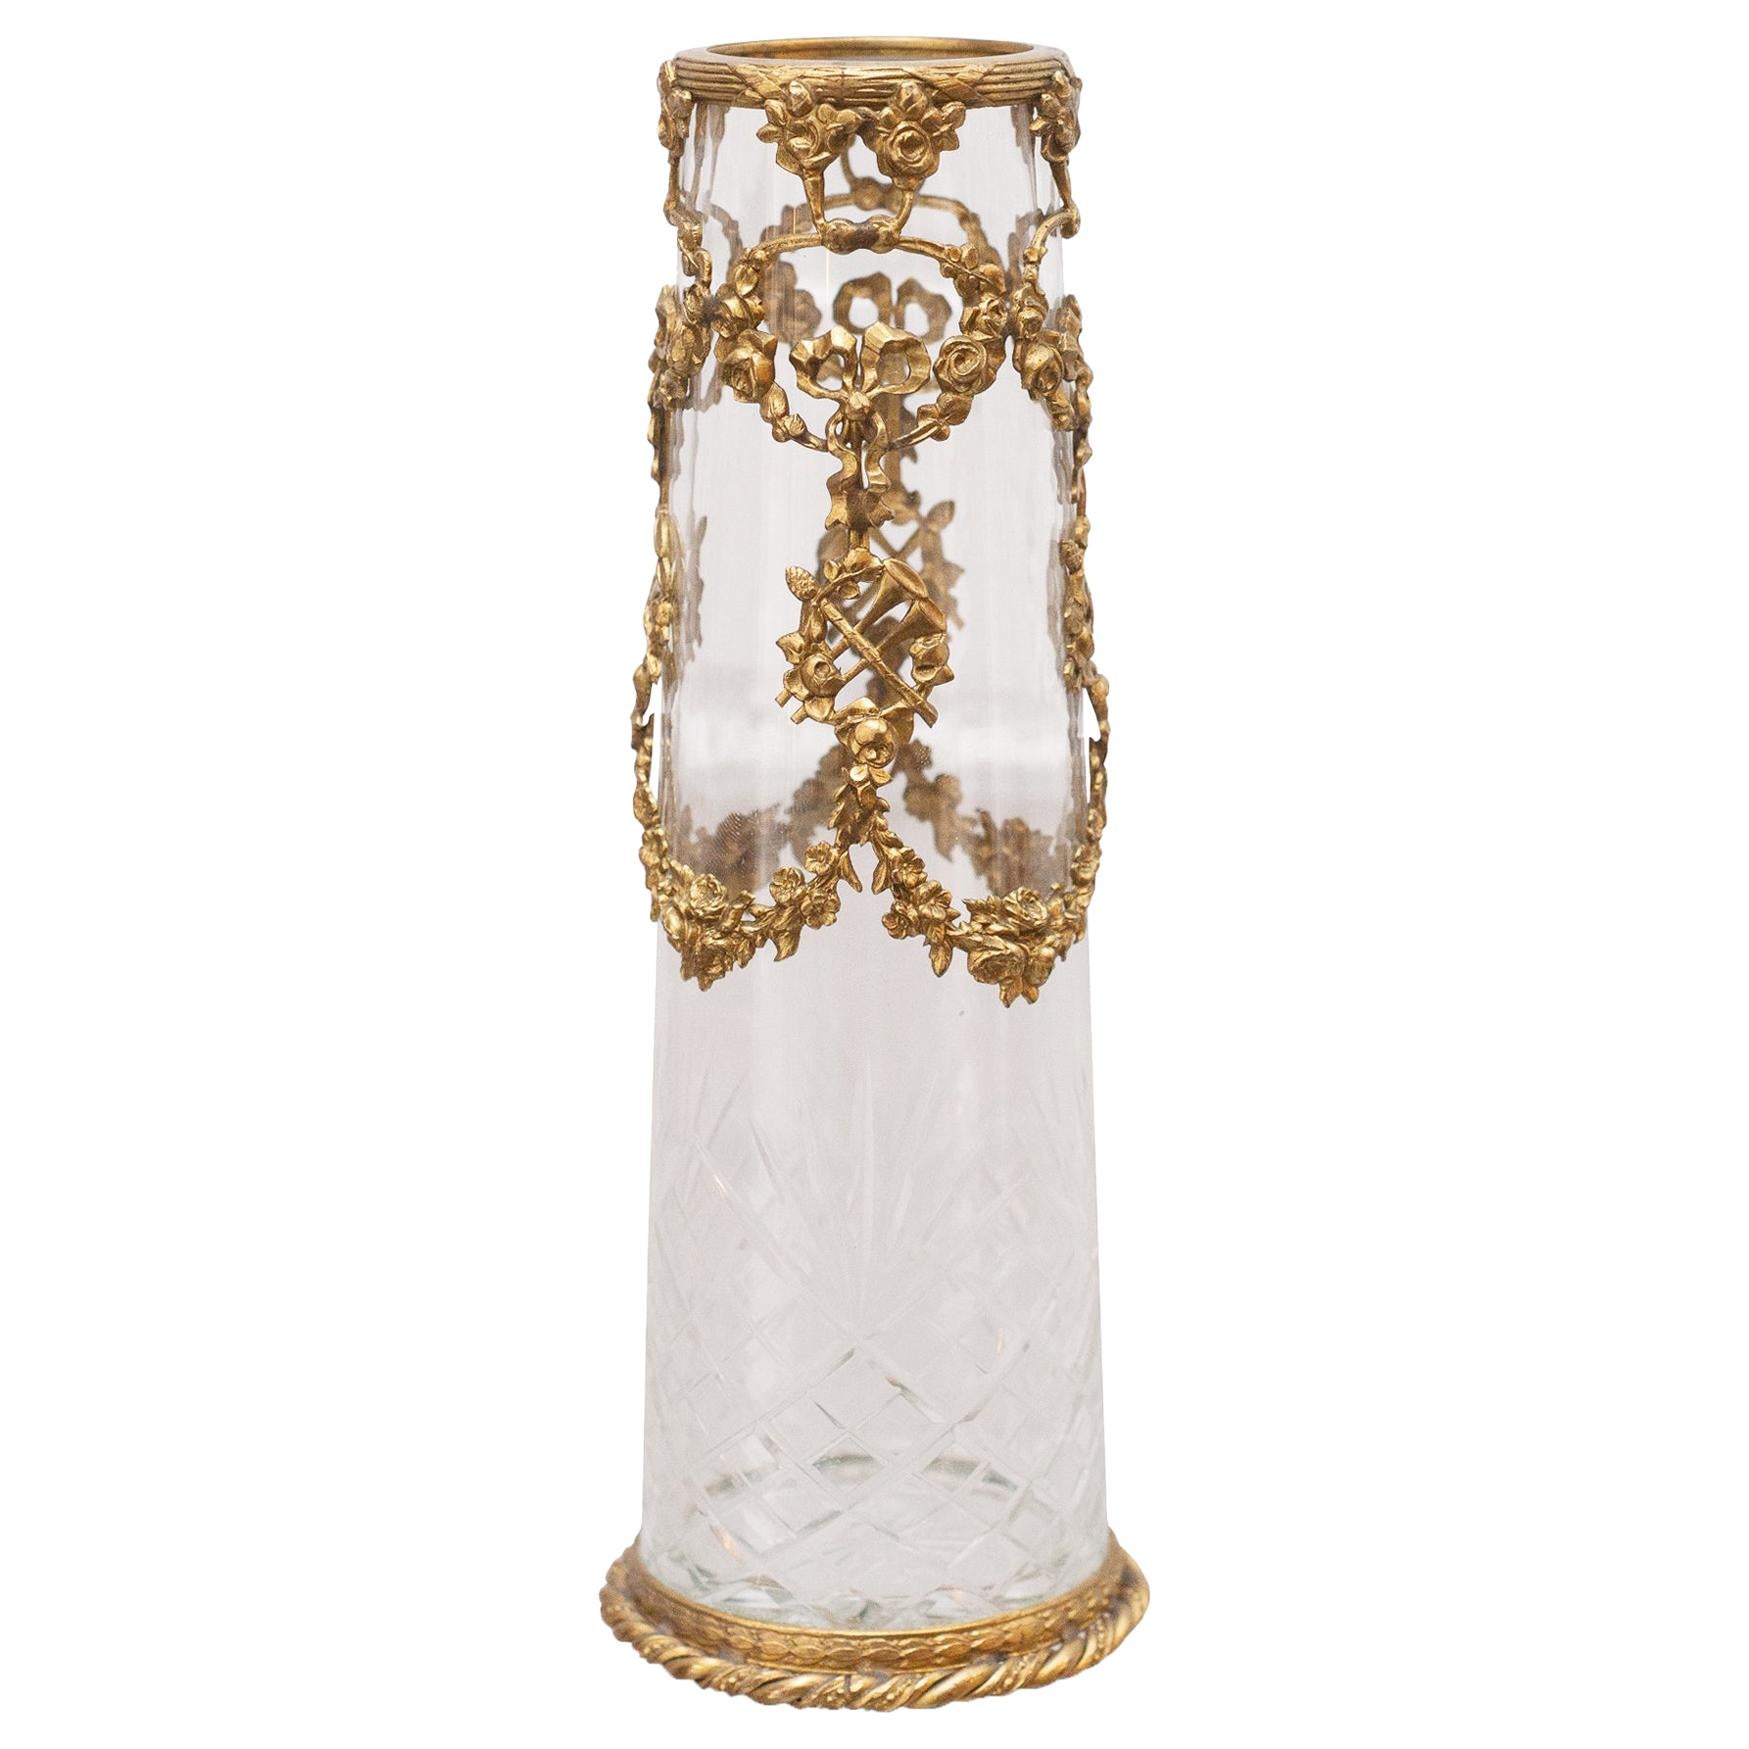 Antique French Small Cut Crystal Vase with Bronze Ormolu Wreaths